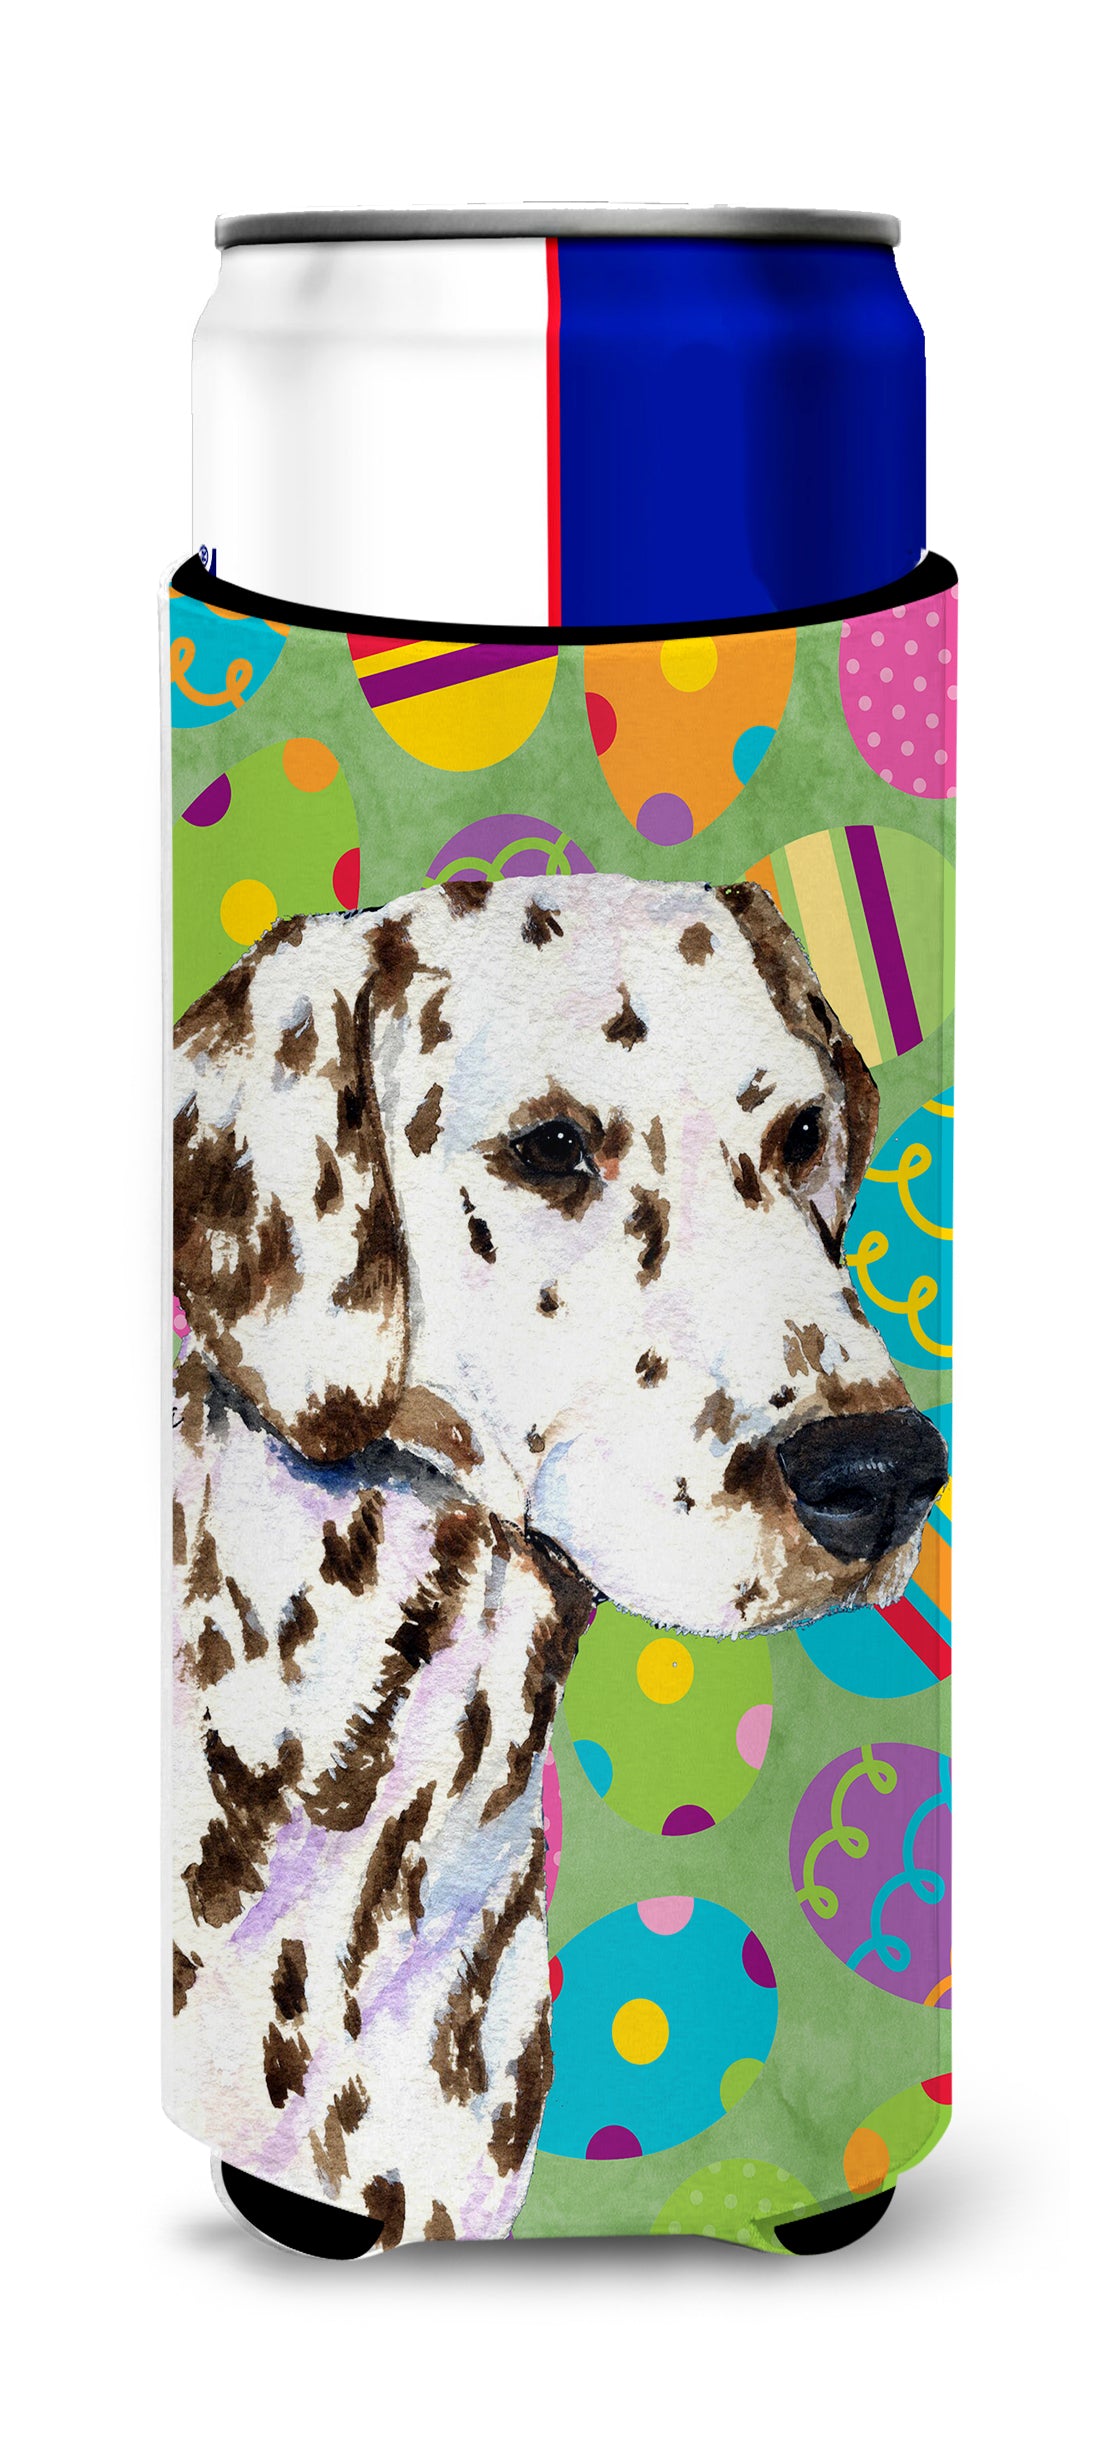 Dalmatian Easter Eggtravaganza Ultra Beverage Insulators for slim cans SS4814MUK.